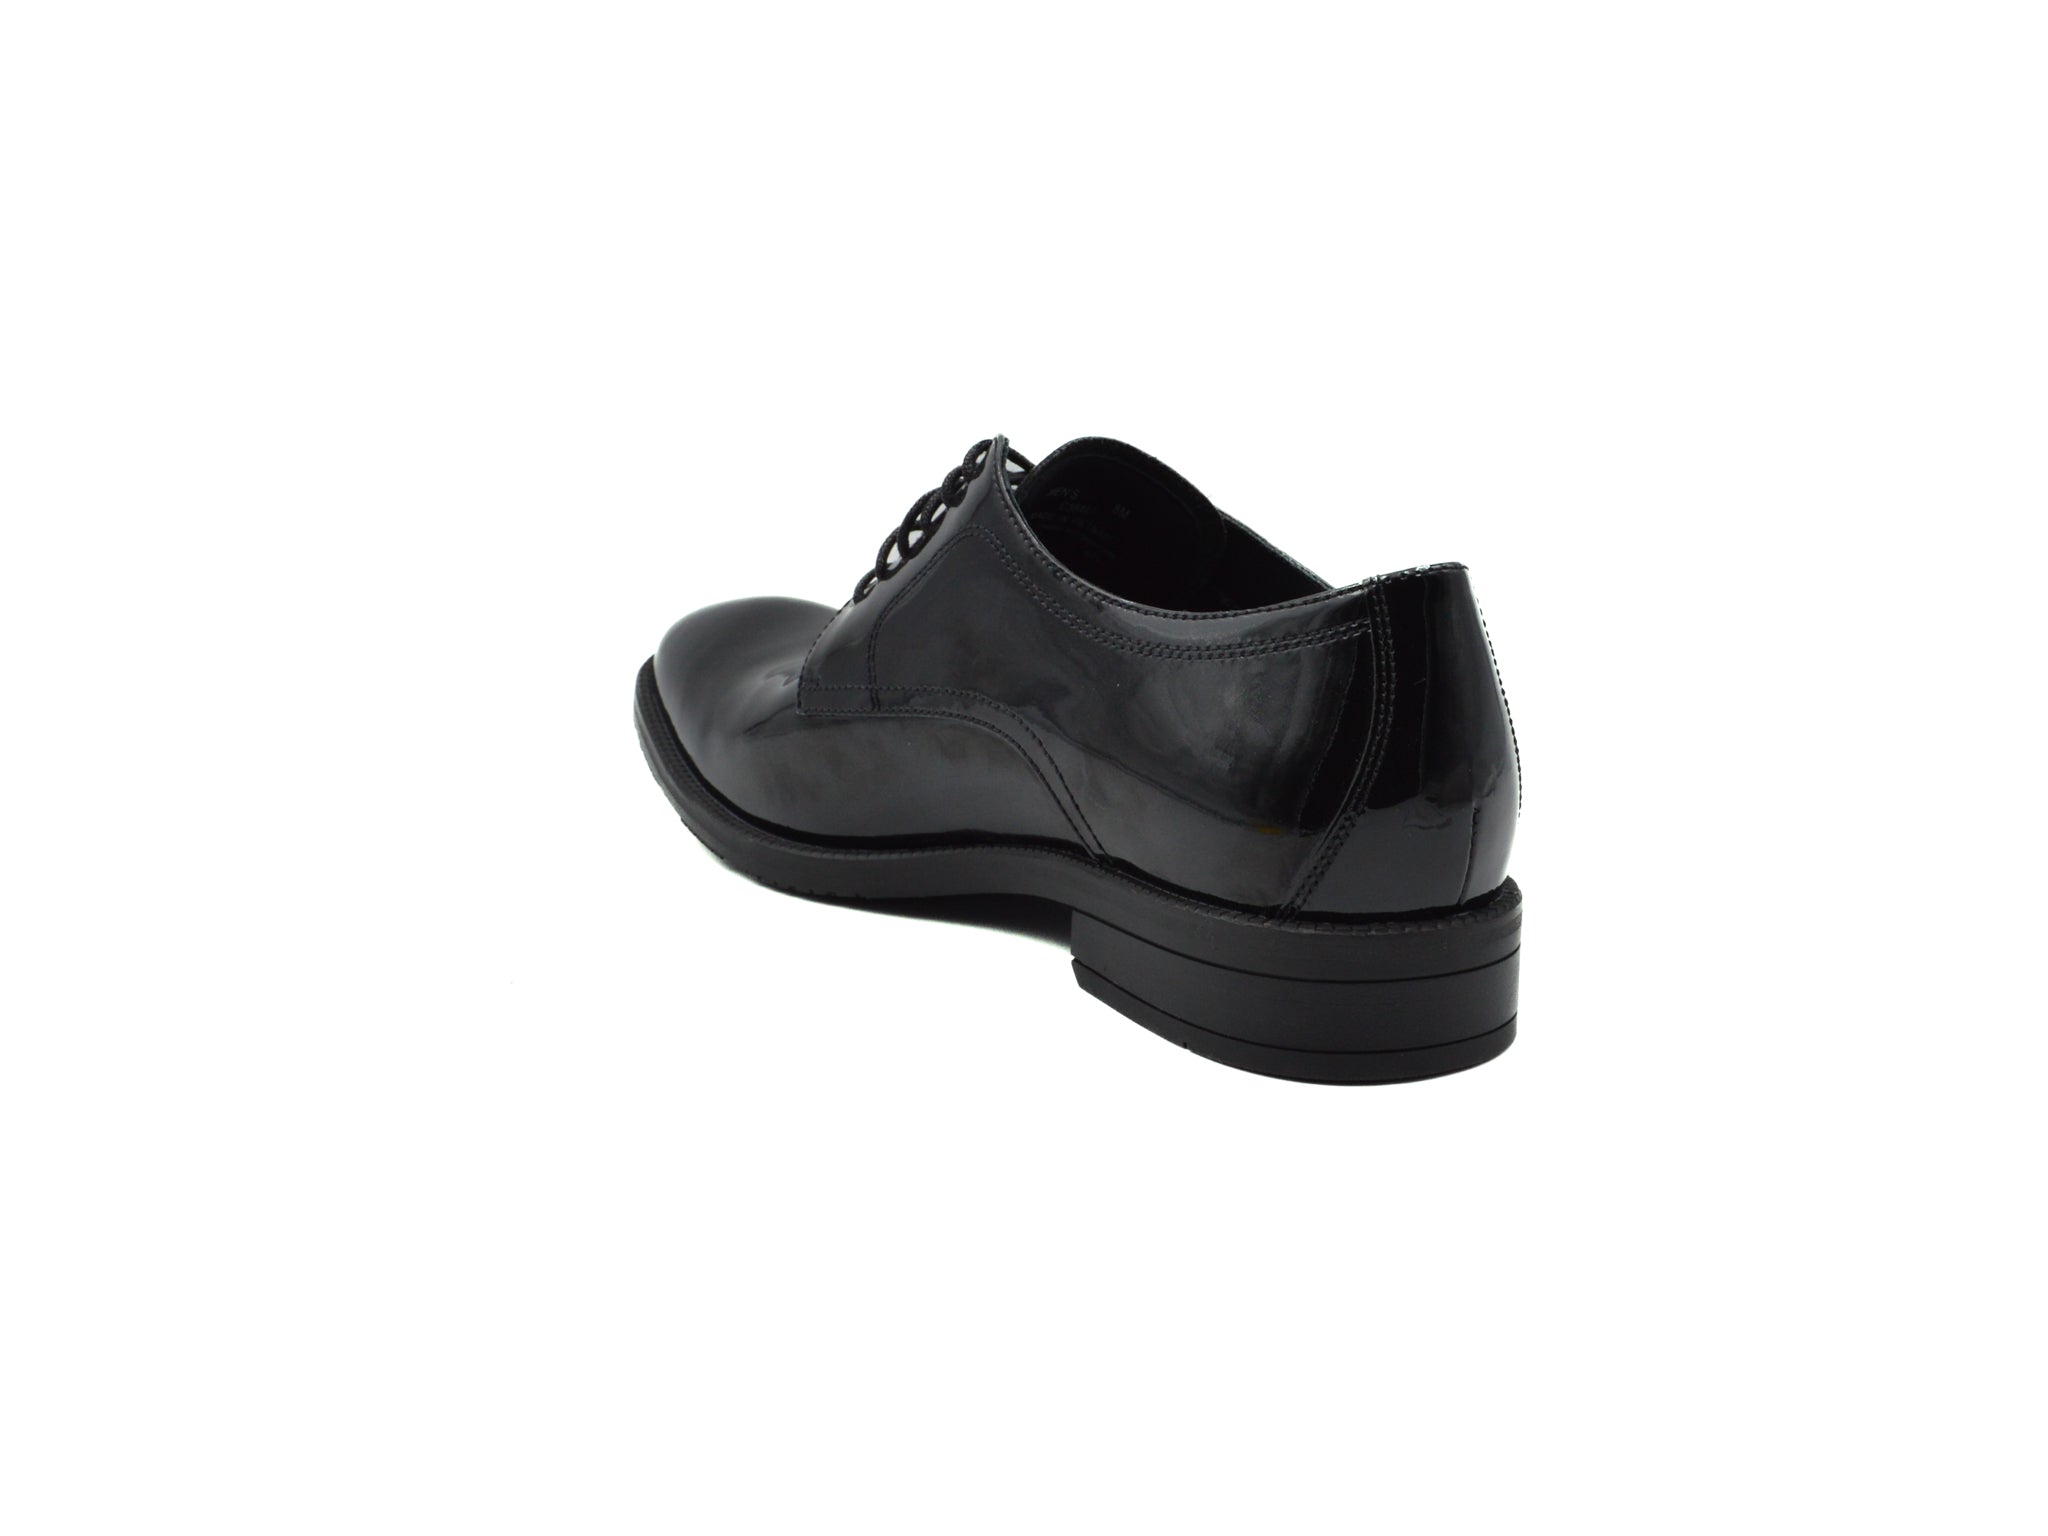 COLE HAAN Modern Essential Patent Leather Plain Toe Oxfords